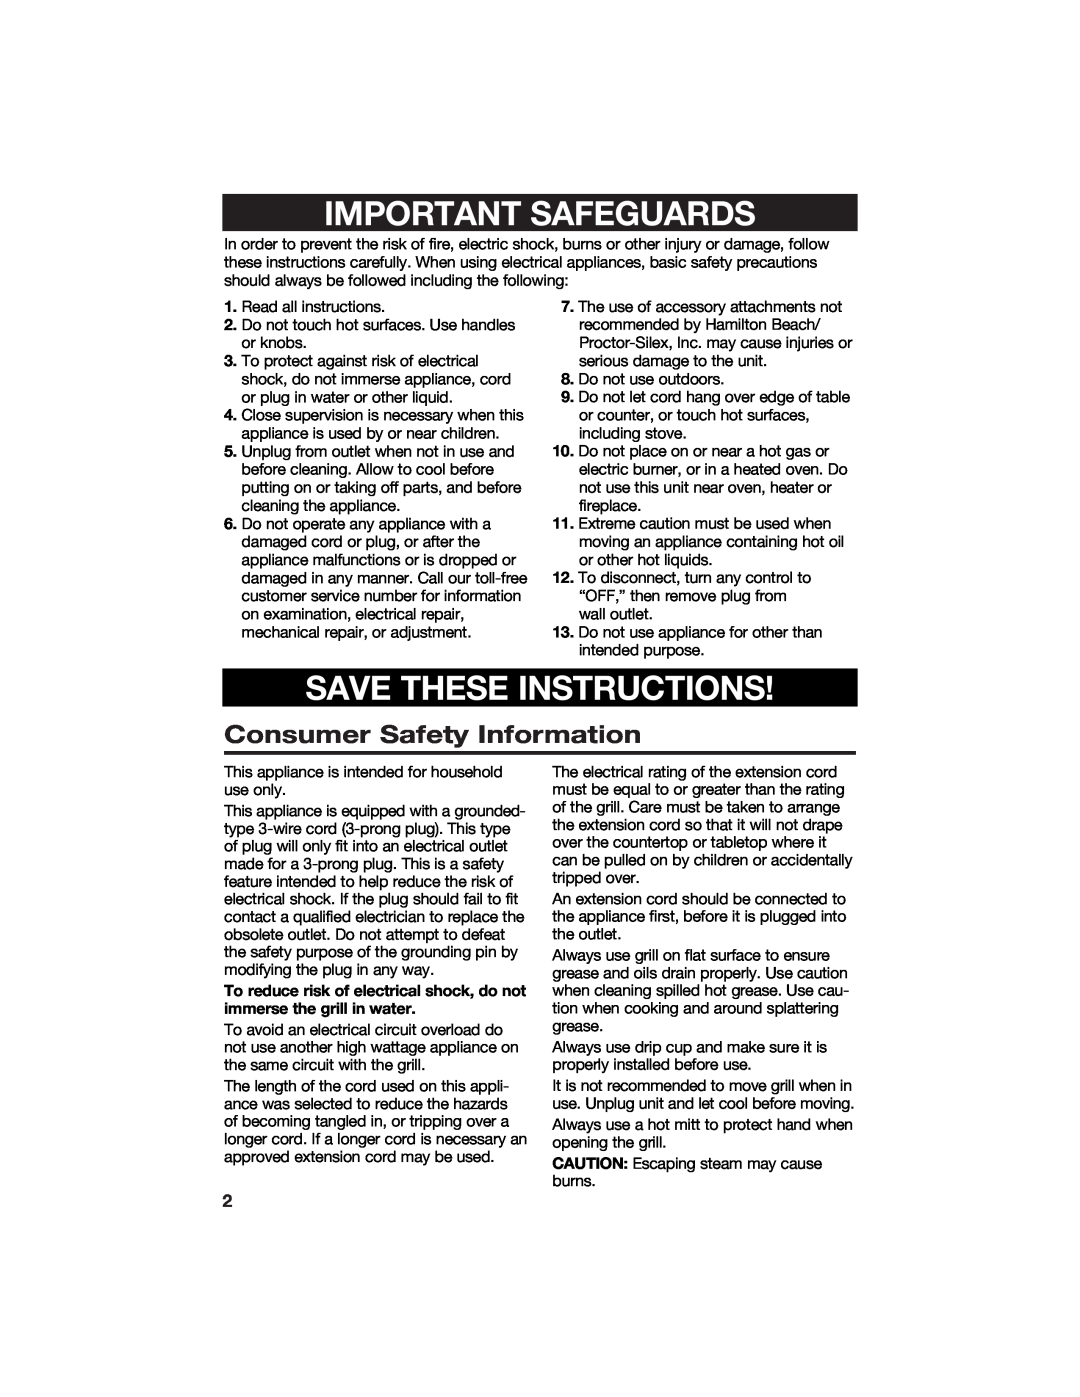 Hamilton Beach 840092400 manual Important Safeguards, Save These Instructions, Consumer Safety Information 